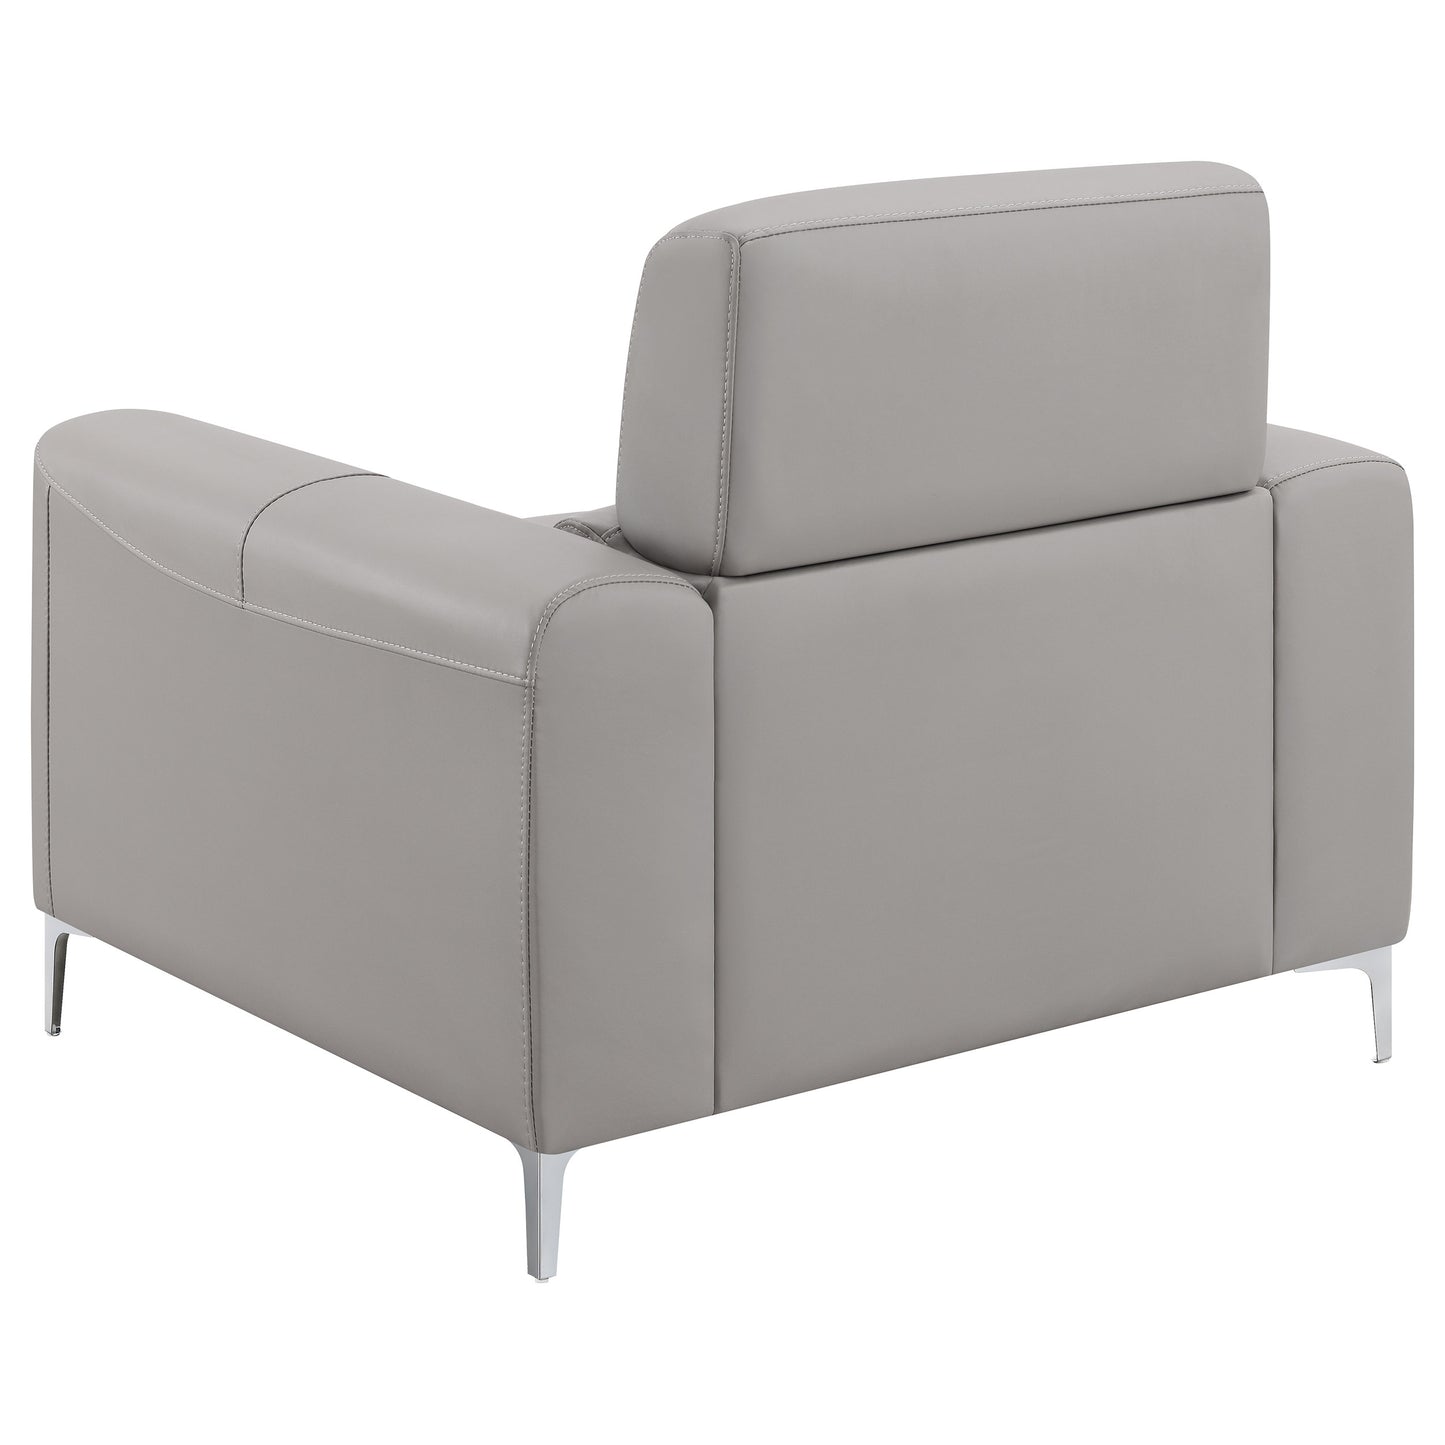 Glenmark Track Arm Upholstered Chair Taupe